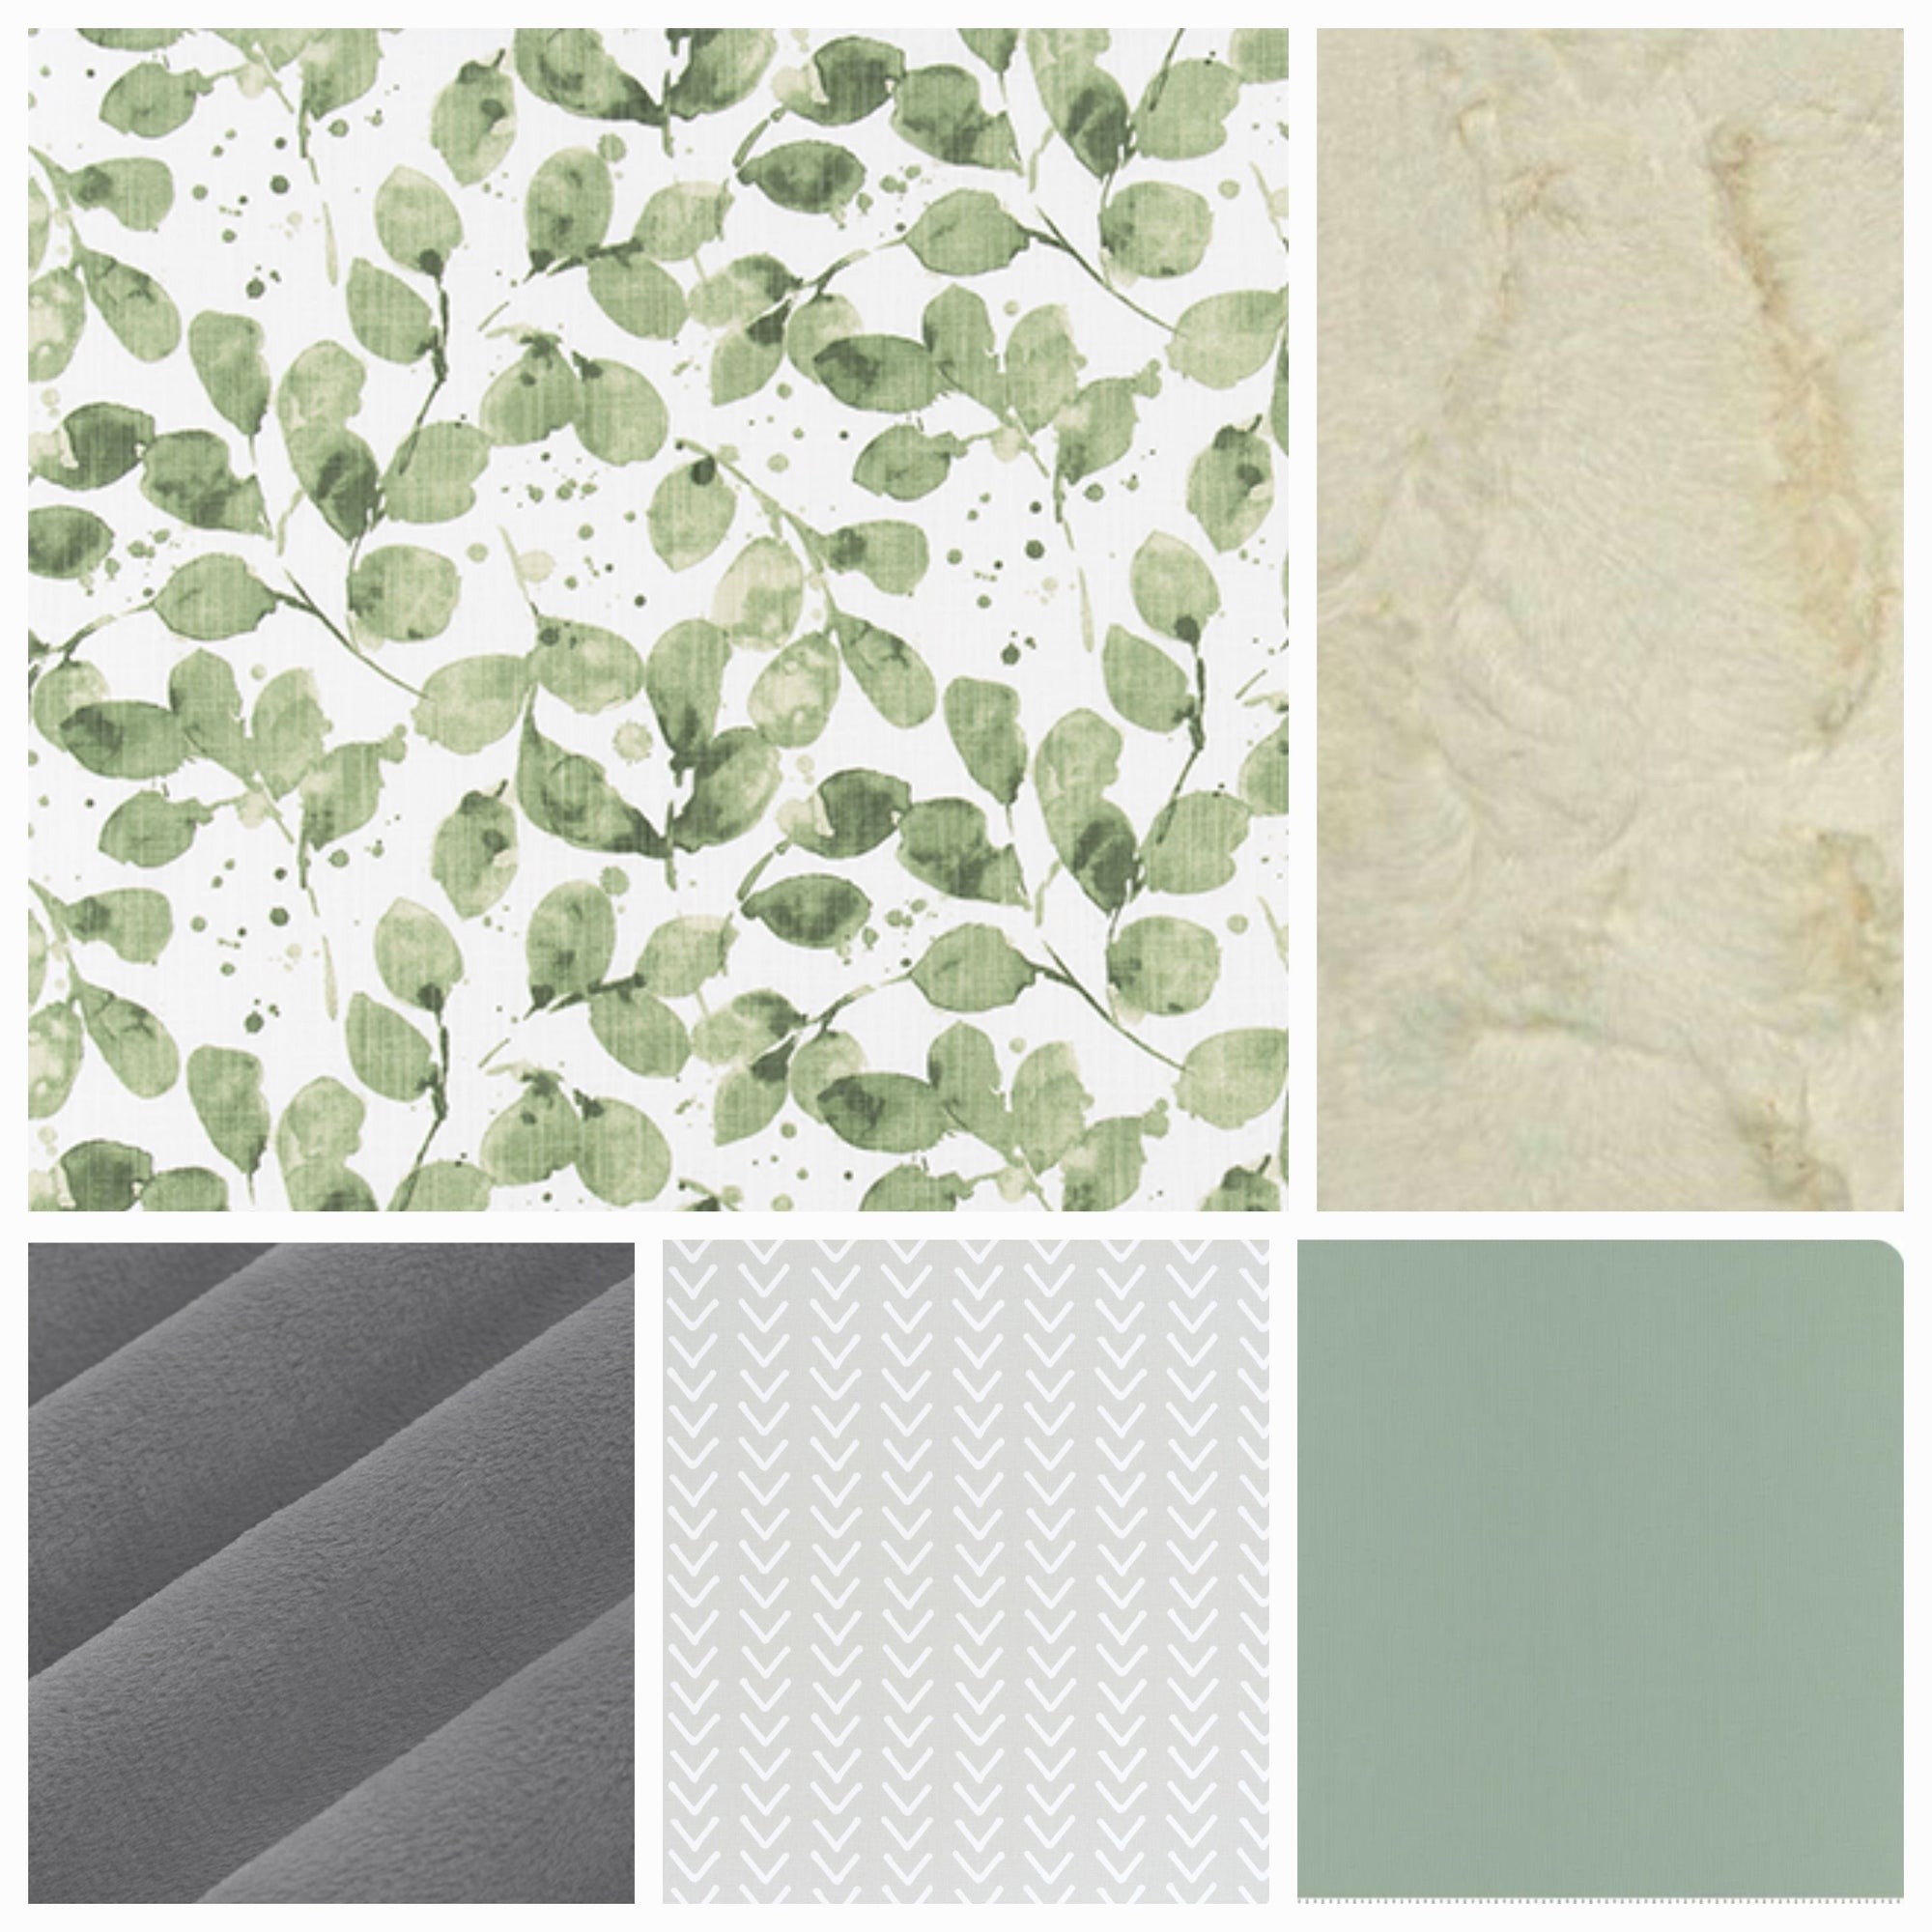 New Release Neutral Crib Bedding- Eucalyptus Leaves Baby Bedding & Nursery Collection - DBC Baby Bedding Co 